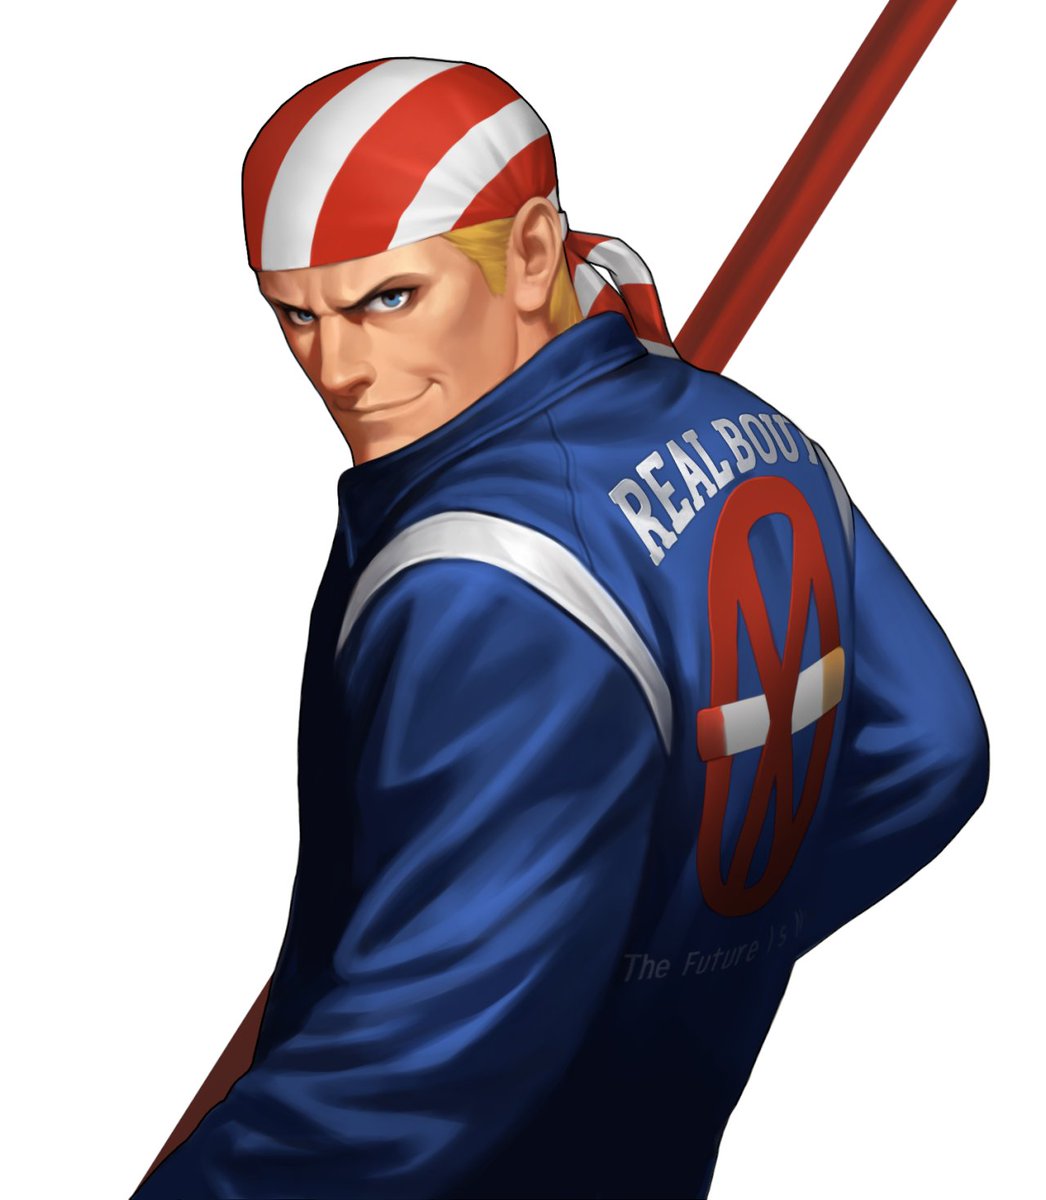 BILLY KANE - "Emperor's Right-Hand Man"Age: 28Country: EnglandTeam: South Town TeamOrigins: Fatal Furyright hand man to the overlord geese howard, billy straddles the line between bad and good. he's mostly into crime for money, and doesn't care much for people's motives.